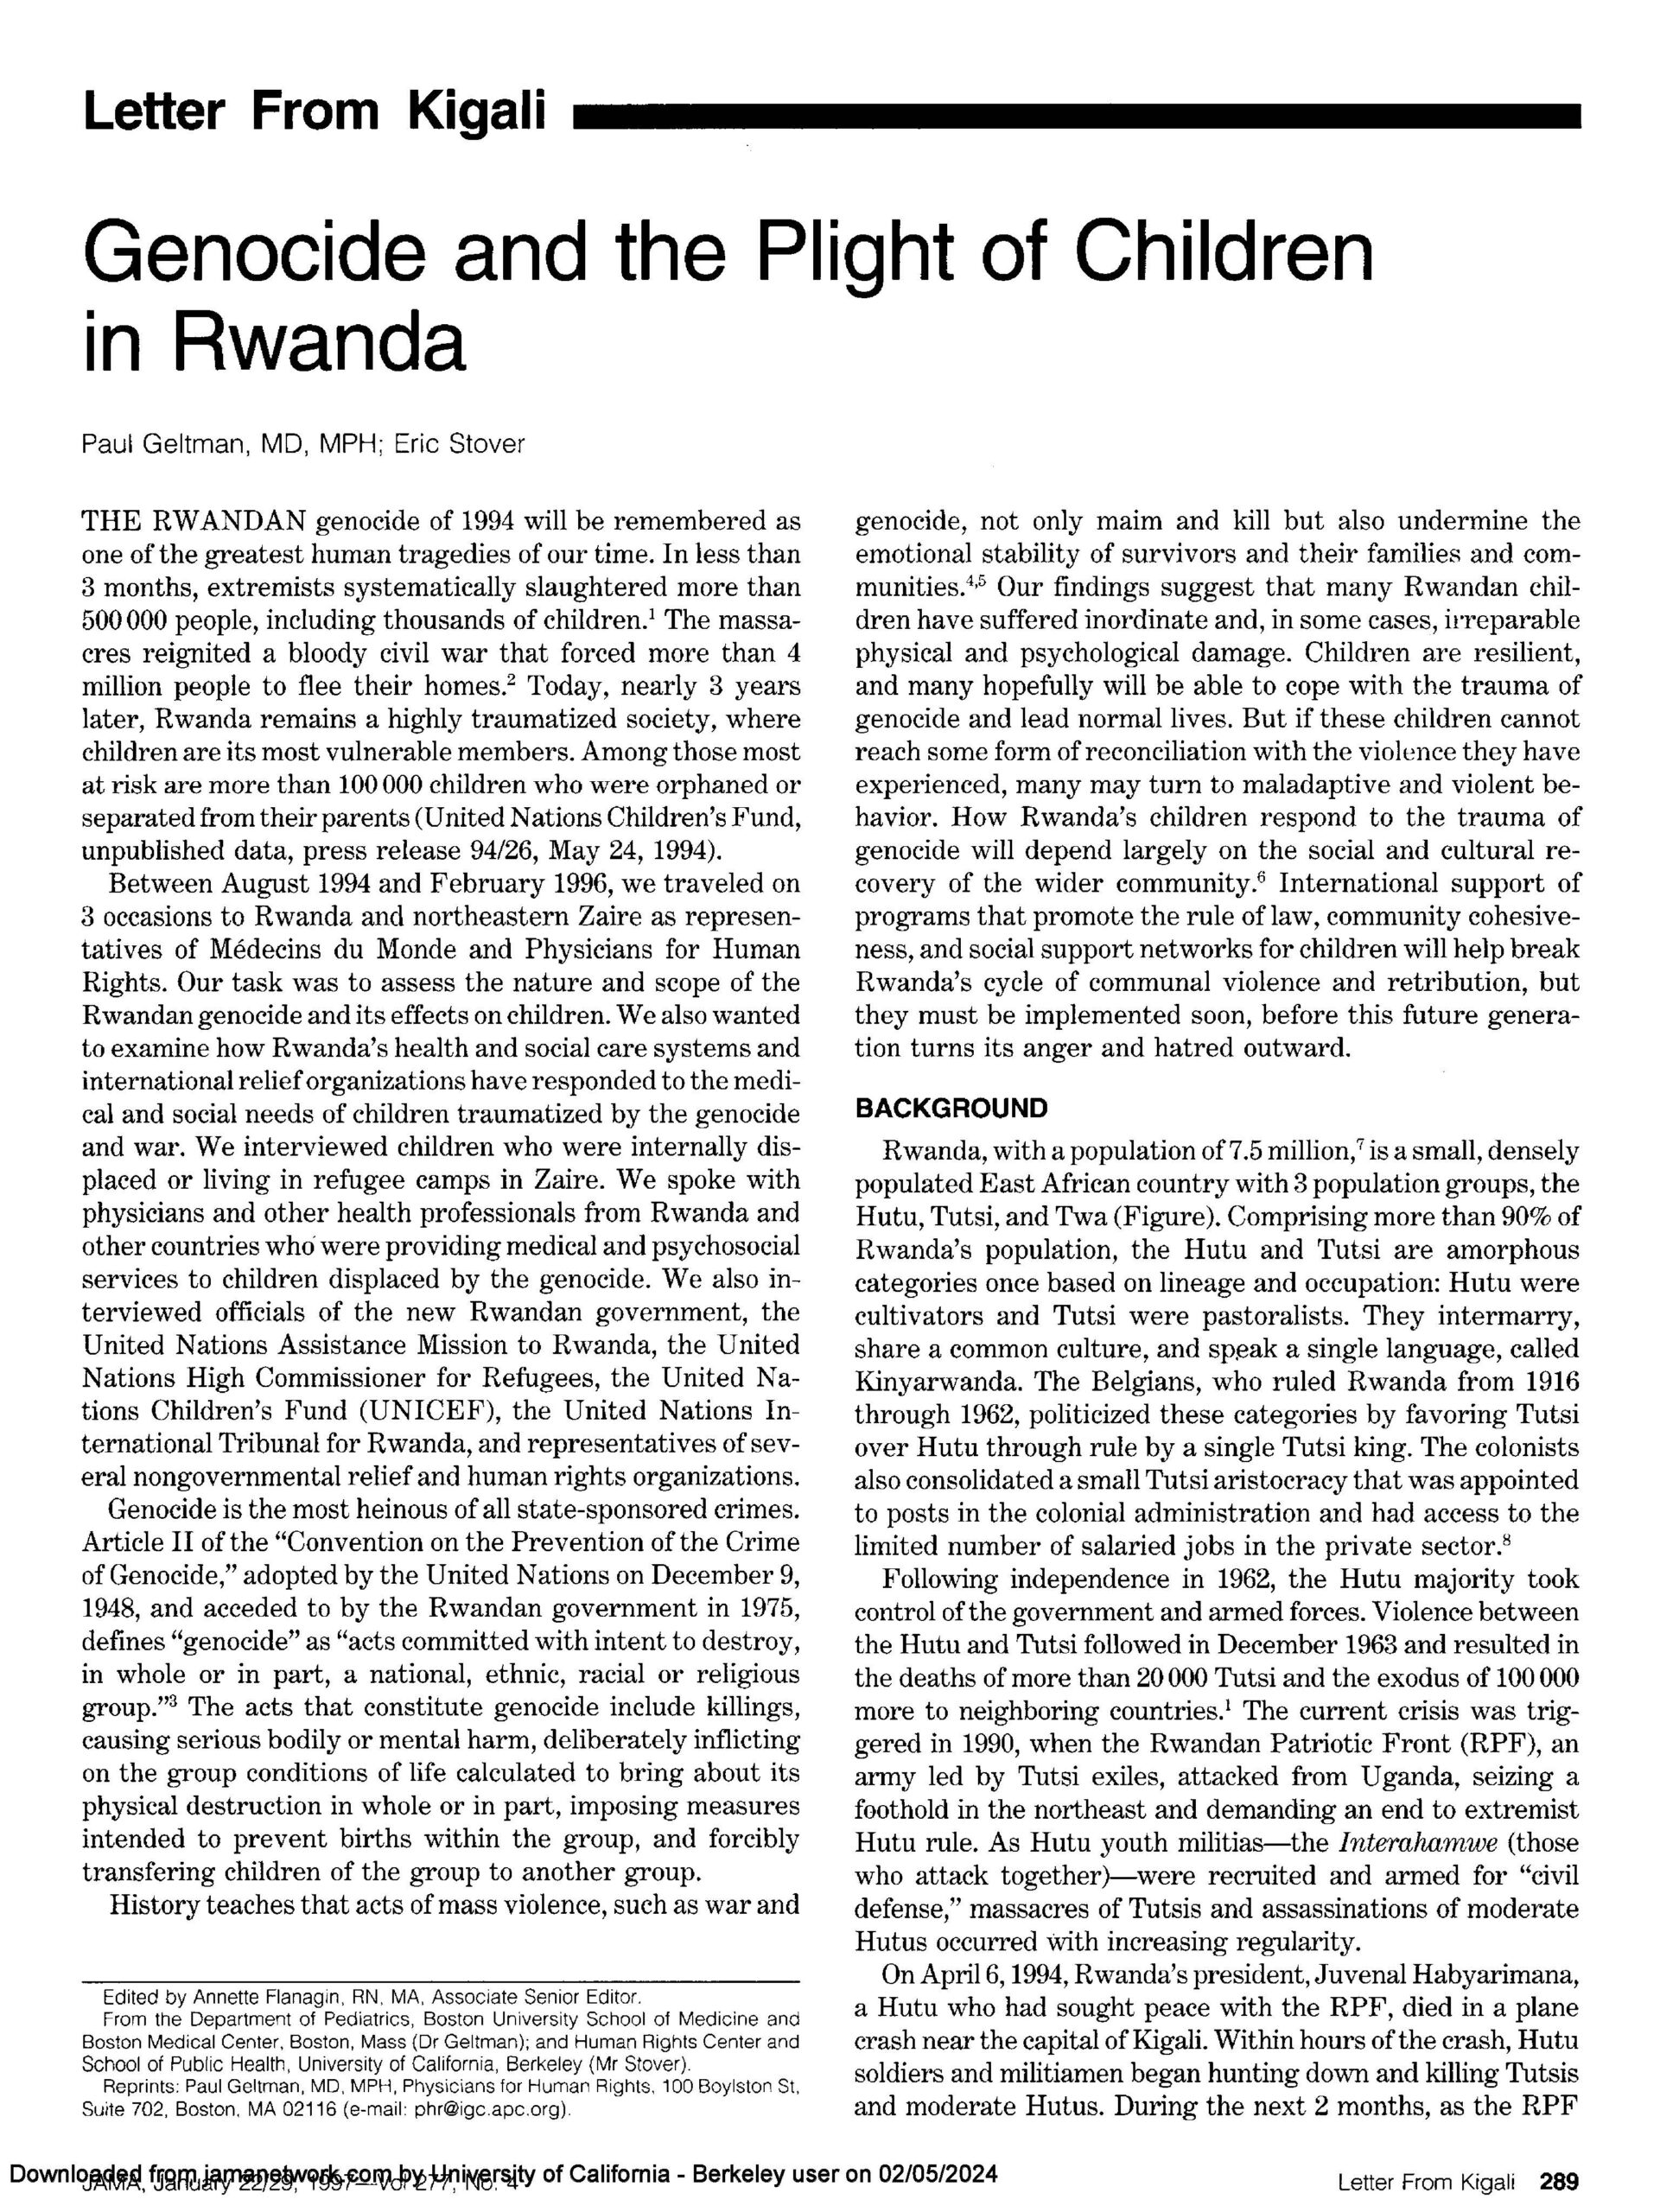 Pages from Genocide and the Plight of Children in Rwanda